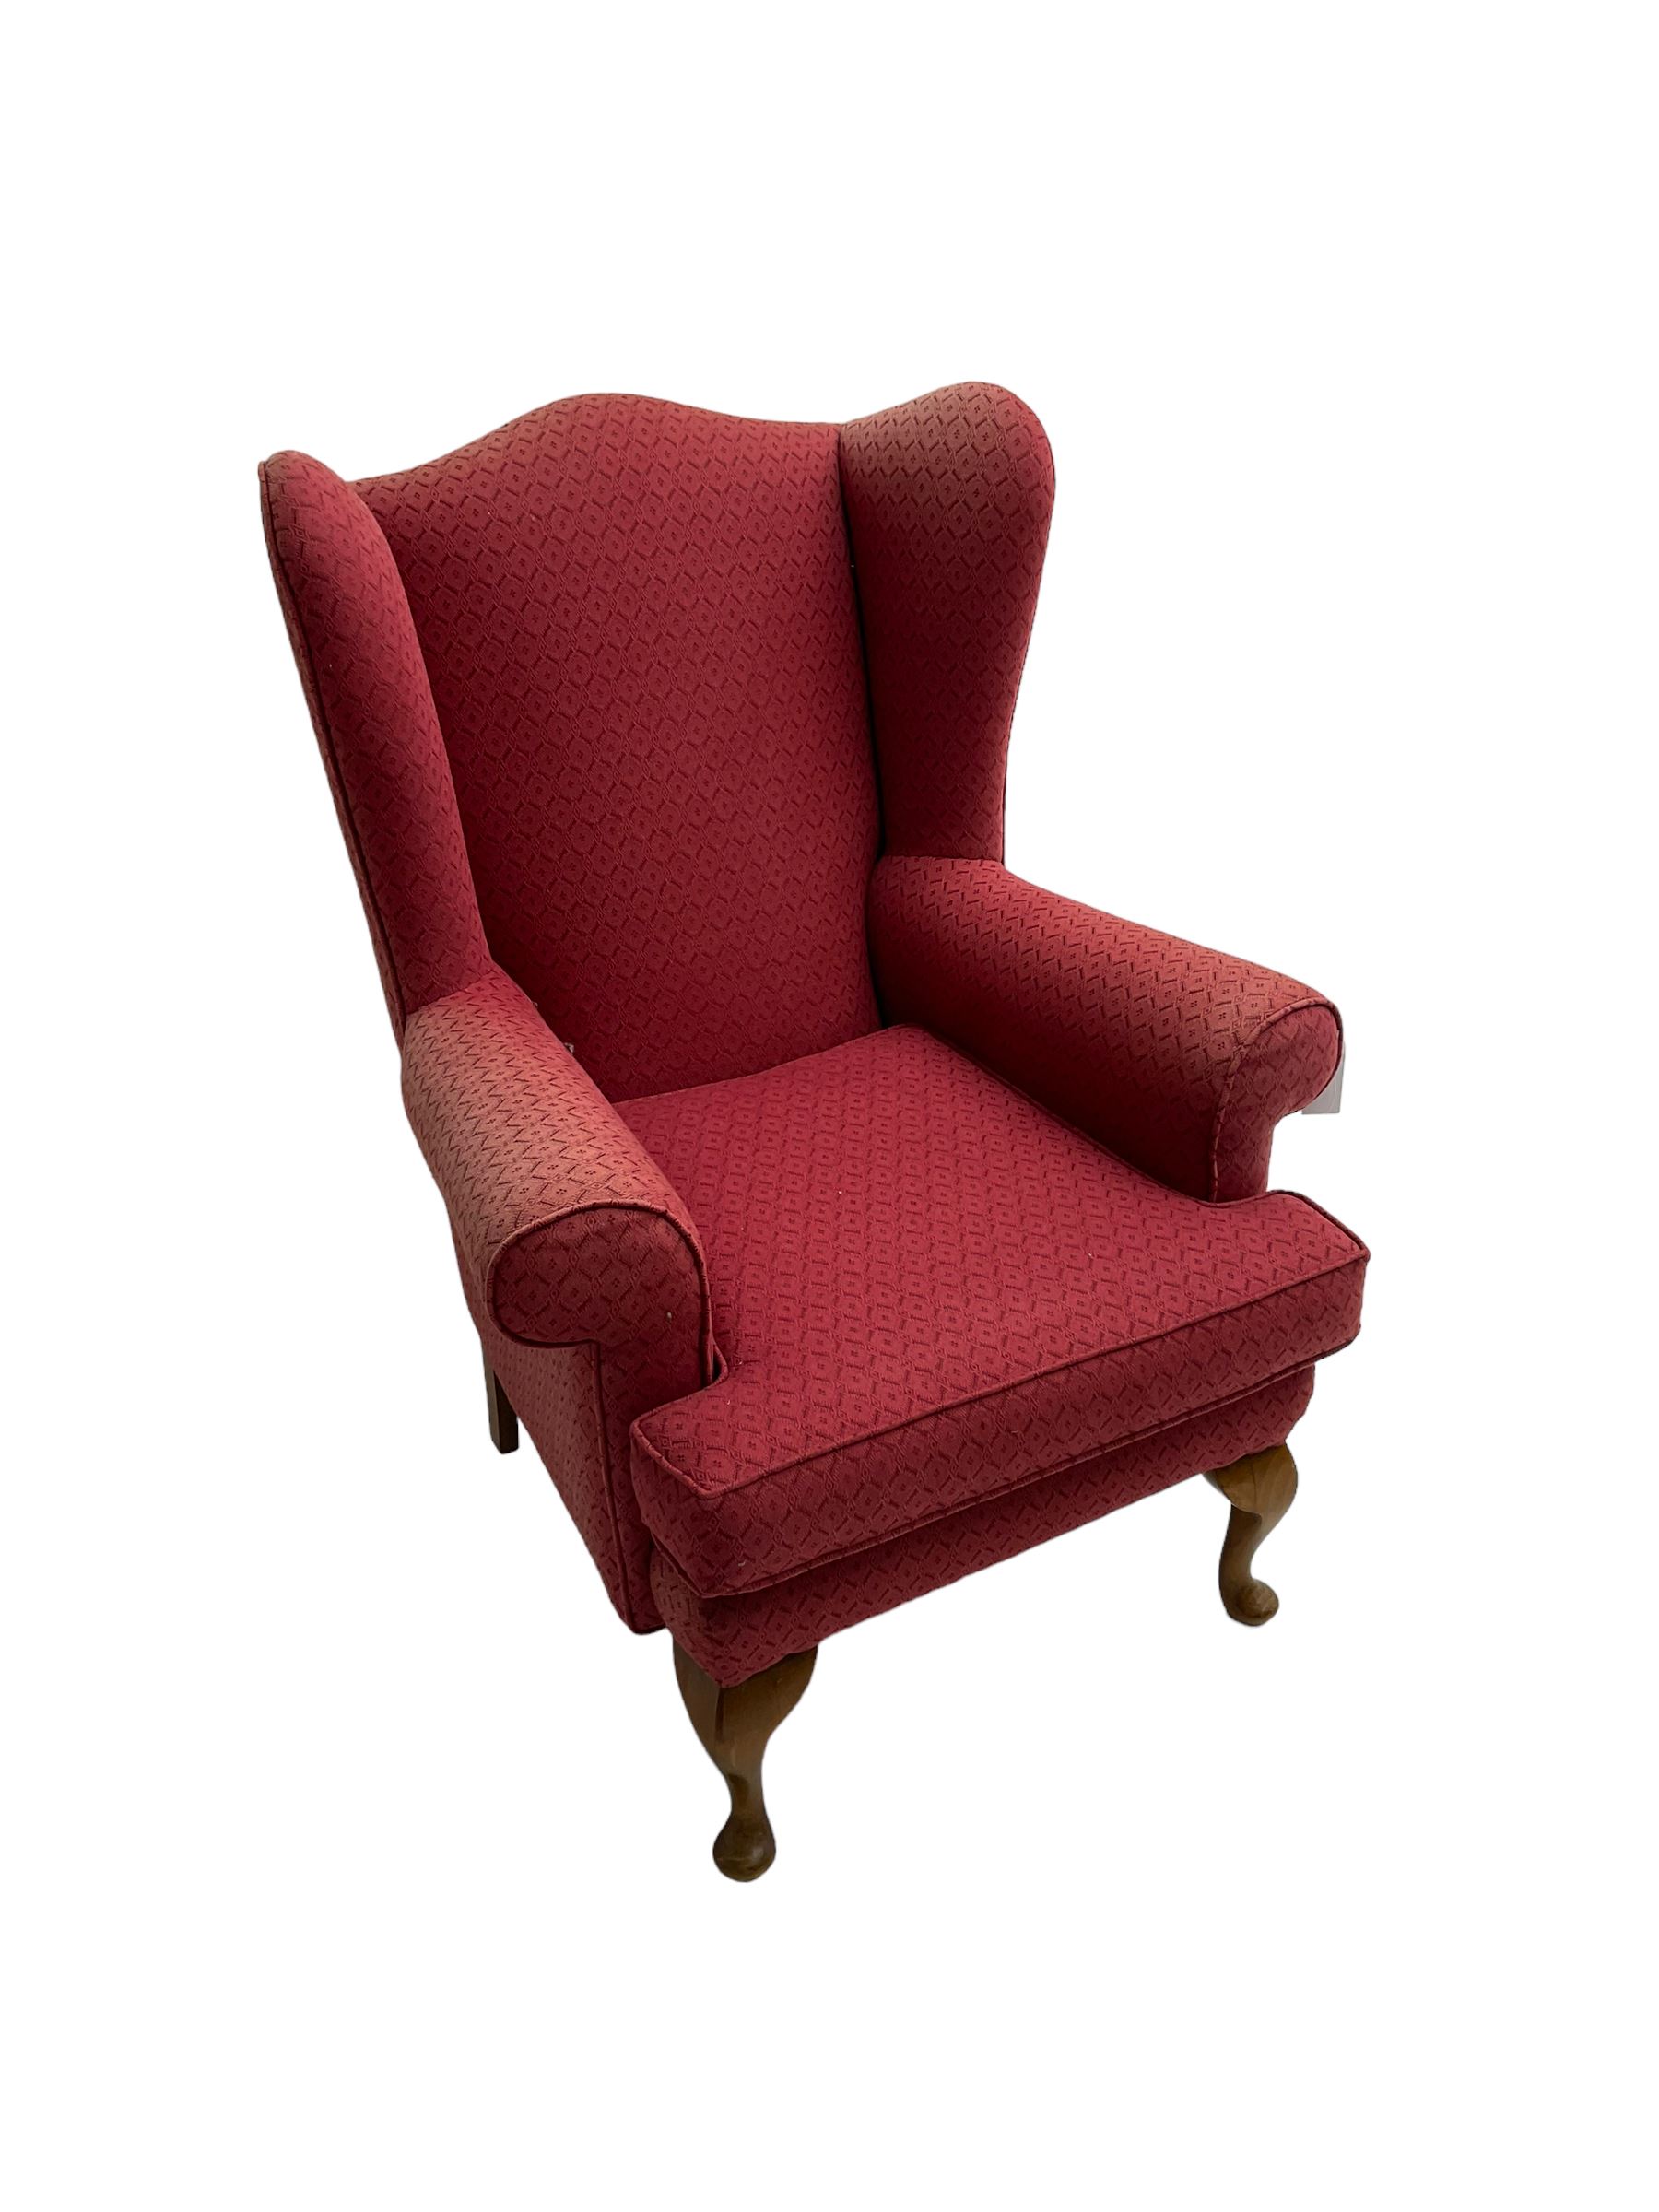 Queen Anne design wingback armchair - Image 5 of 7